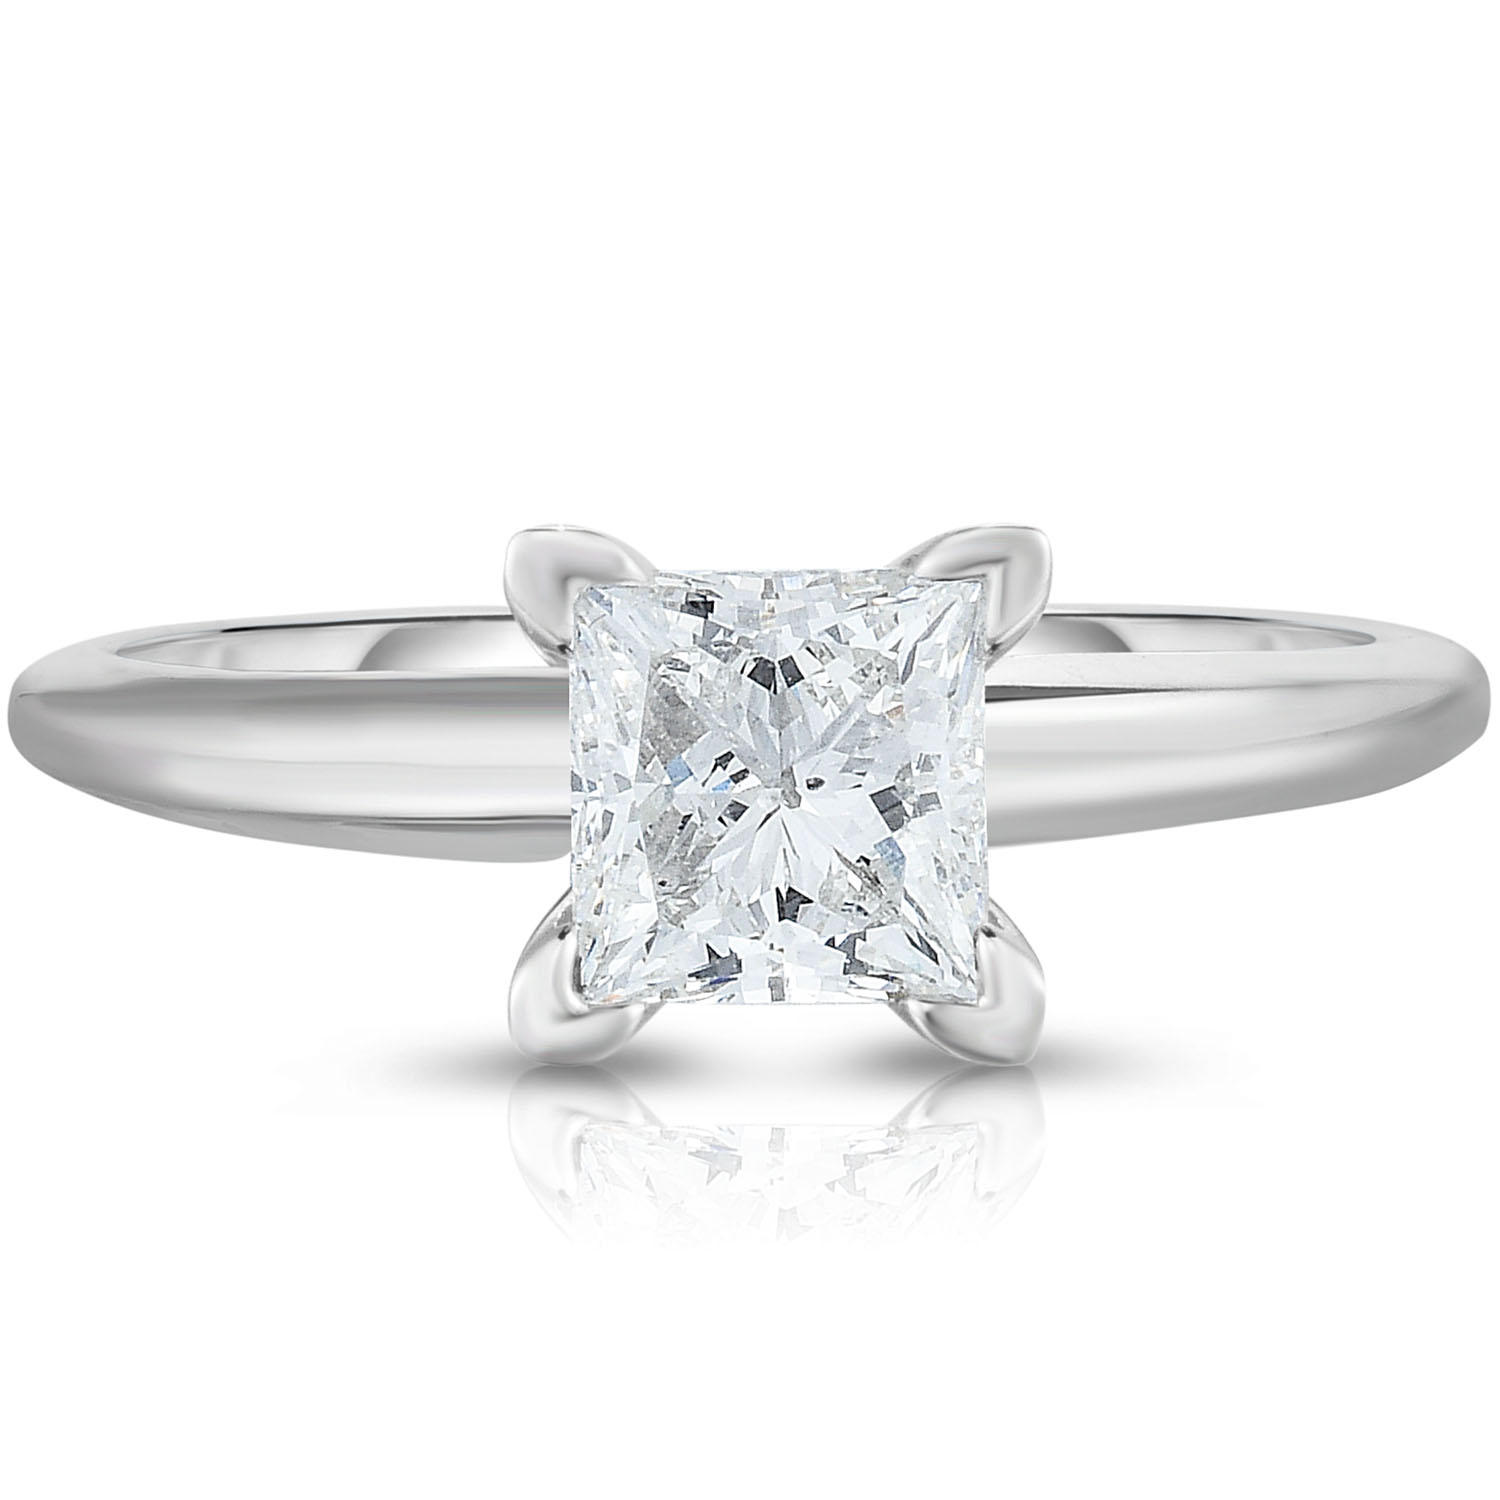 0.95 CT. T.W. Princess Diamond Solitaire Ring in 14k White Gold